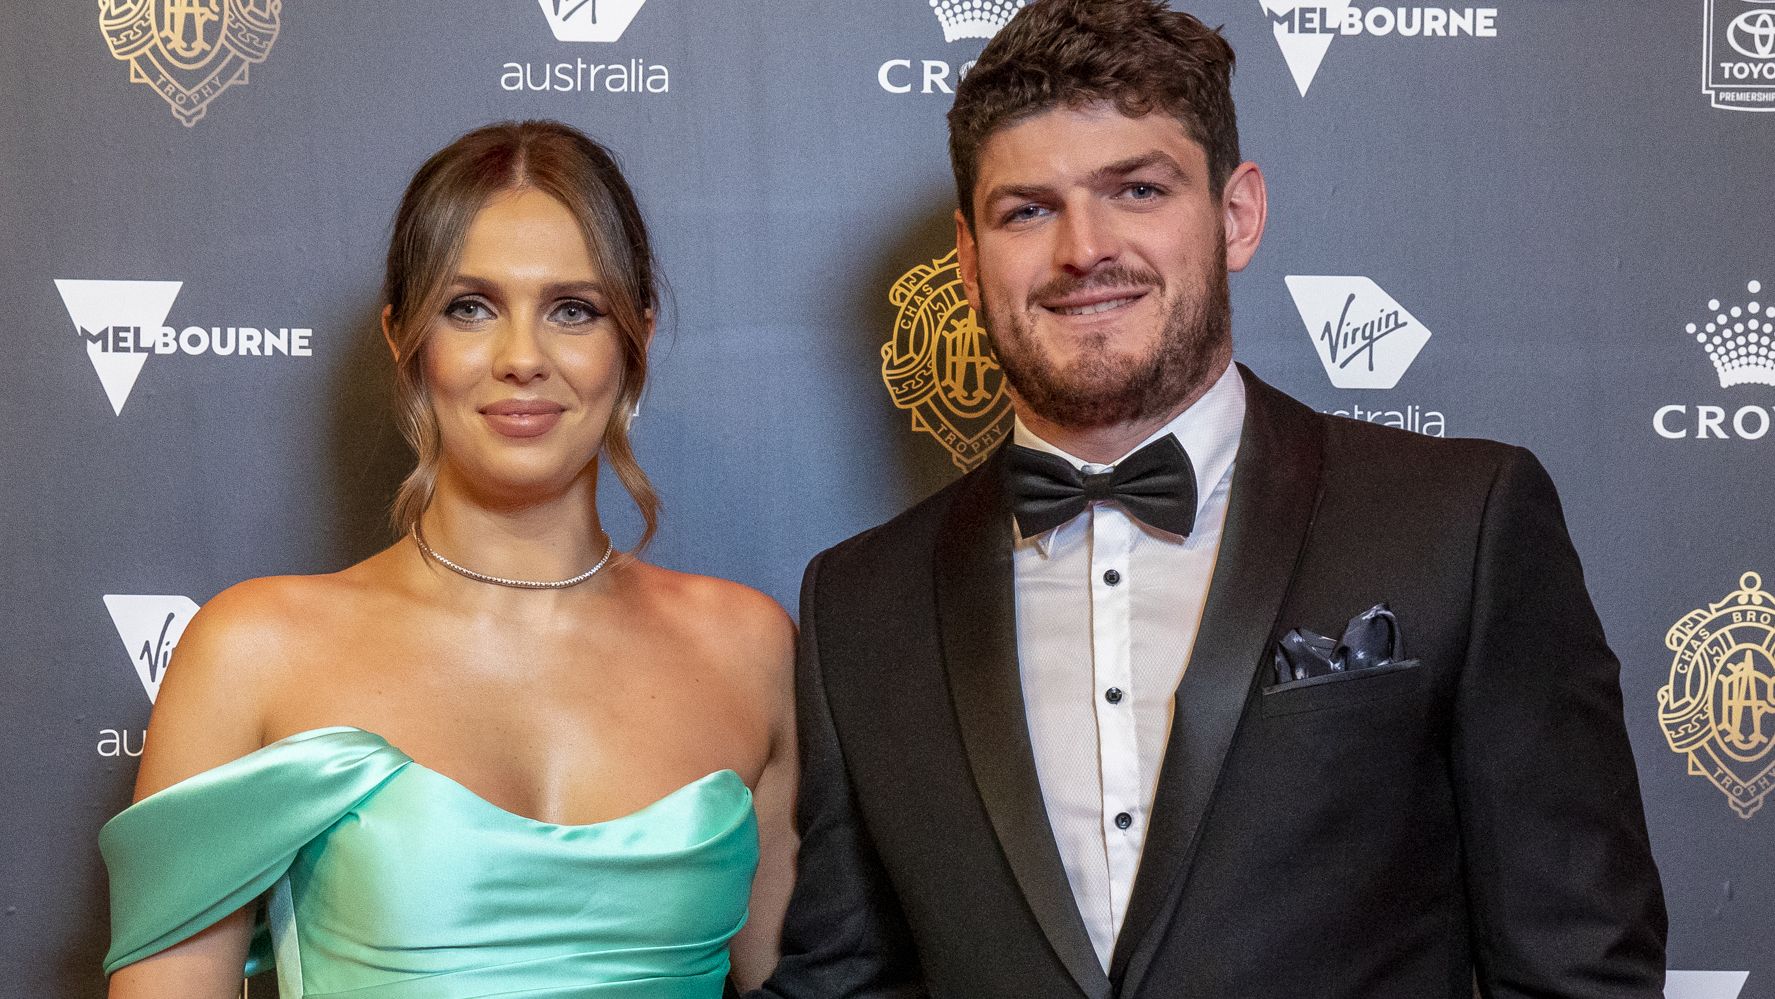 Fiancee connection behind distressed family reaction to Angus Brayshaw's latest head knock